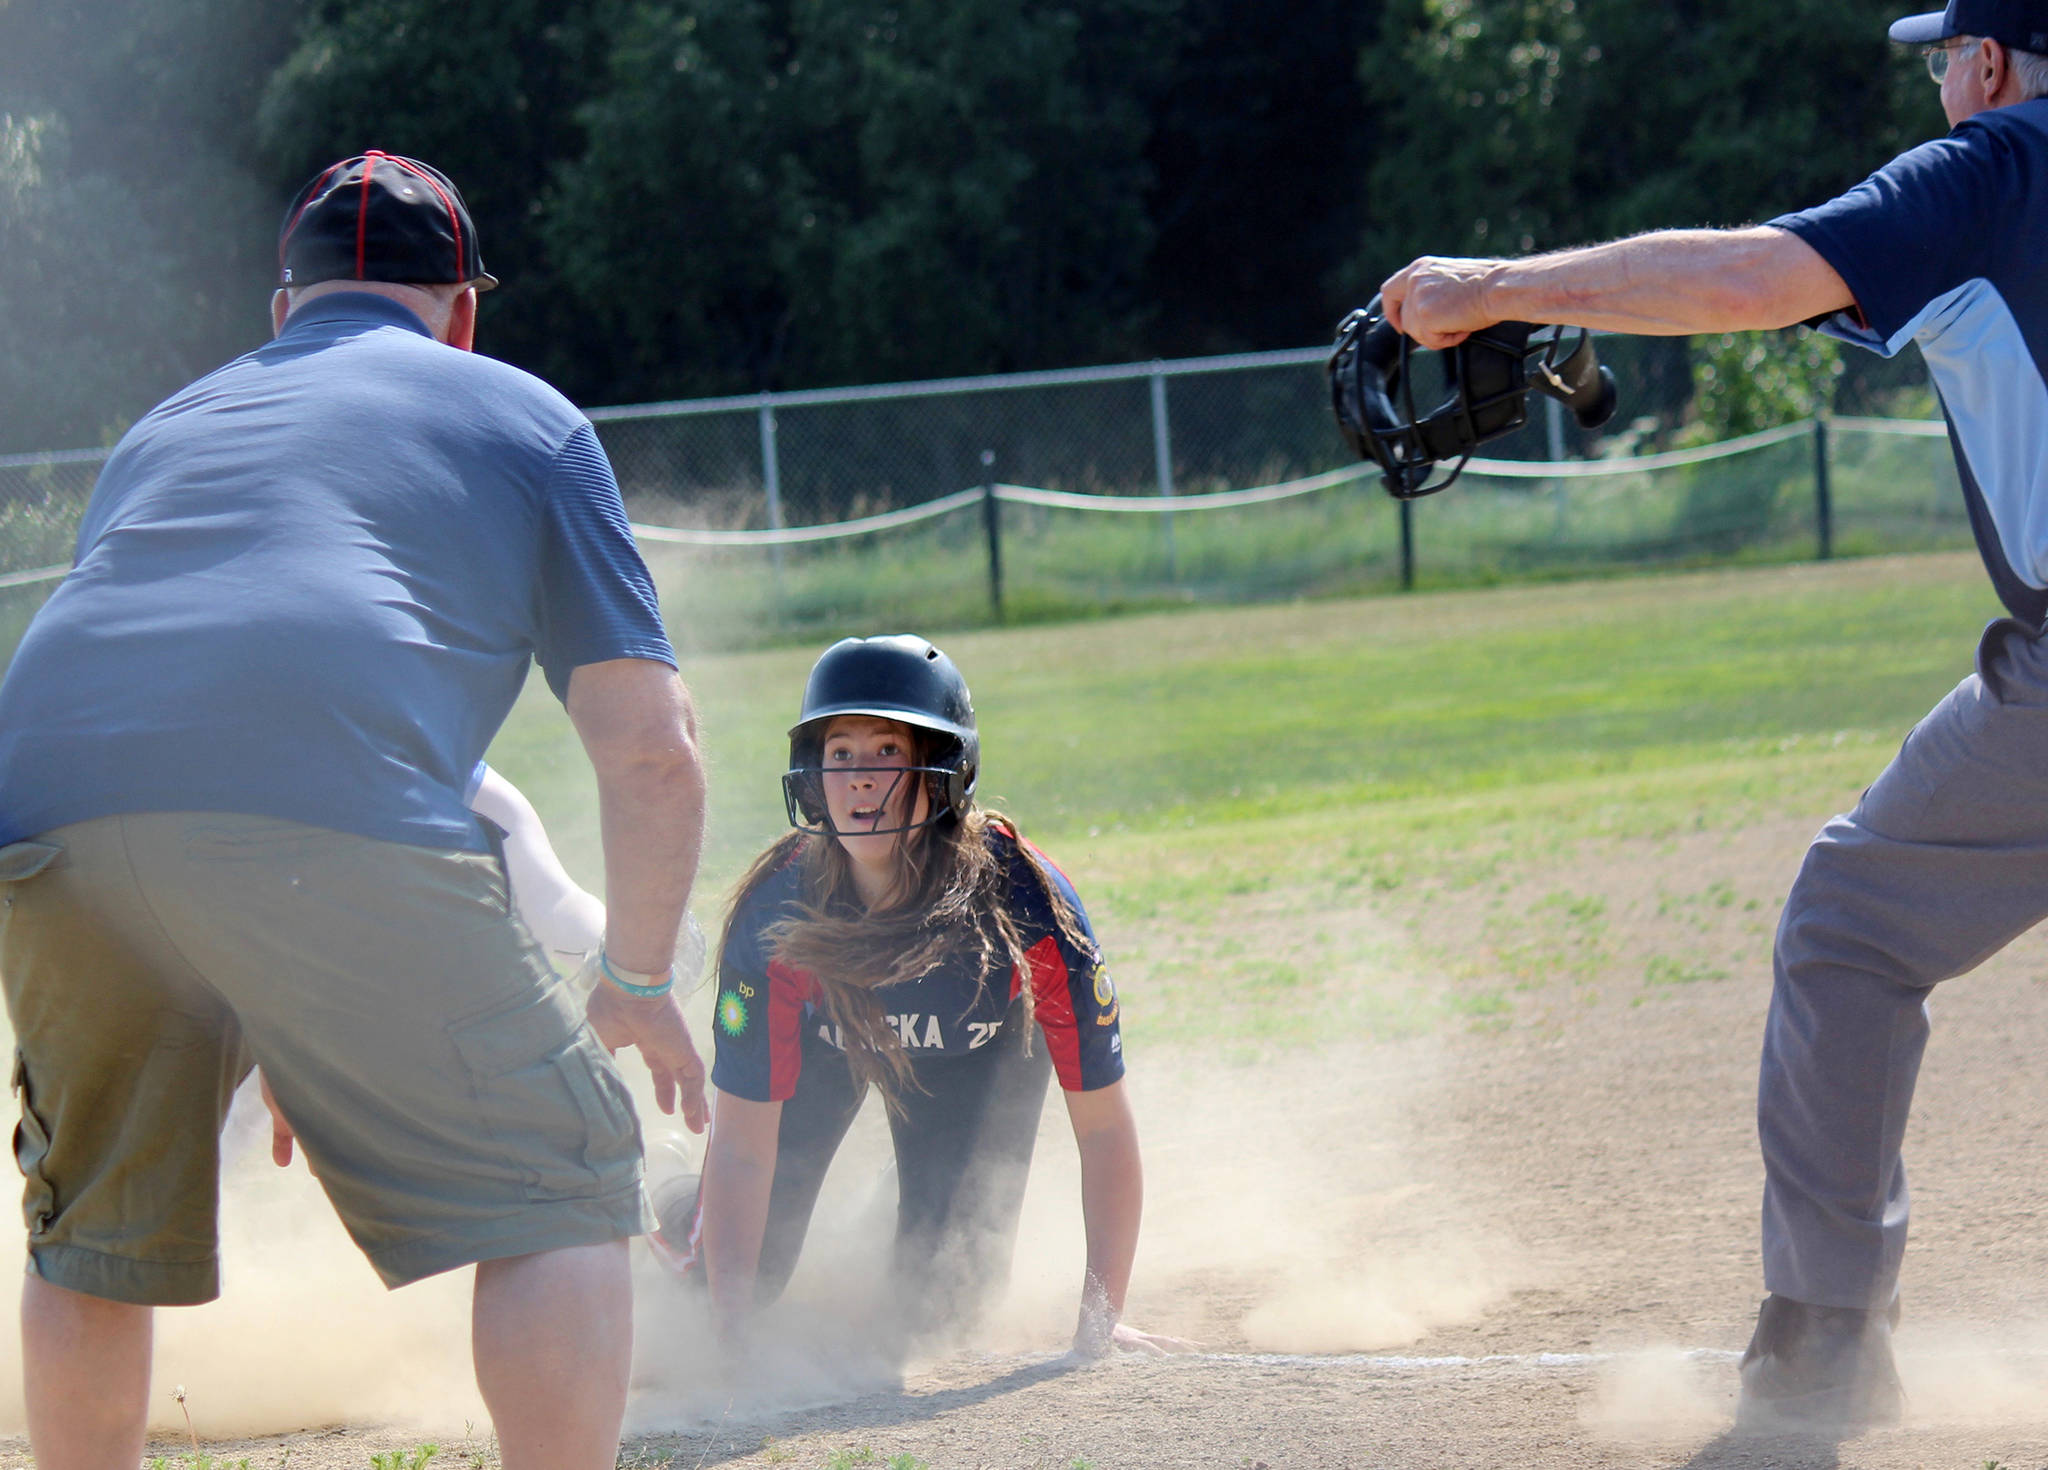 AK Riptide’s Amber Nash land on third base in a cloud of dust with her eyes on Coach Bob Frates on June 29, 2019, at Jack Gist Field in Homer, Alaska. Umpire BIll Bell signals that Nash is safe. (Photo by McKibben Jackinsky)